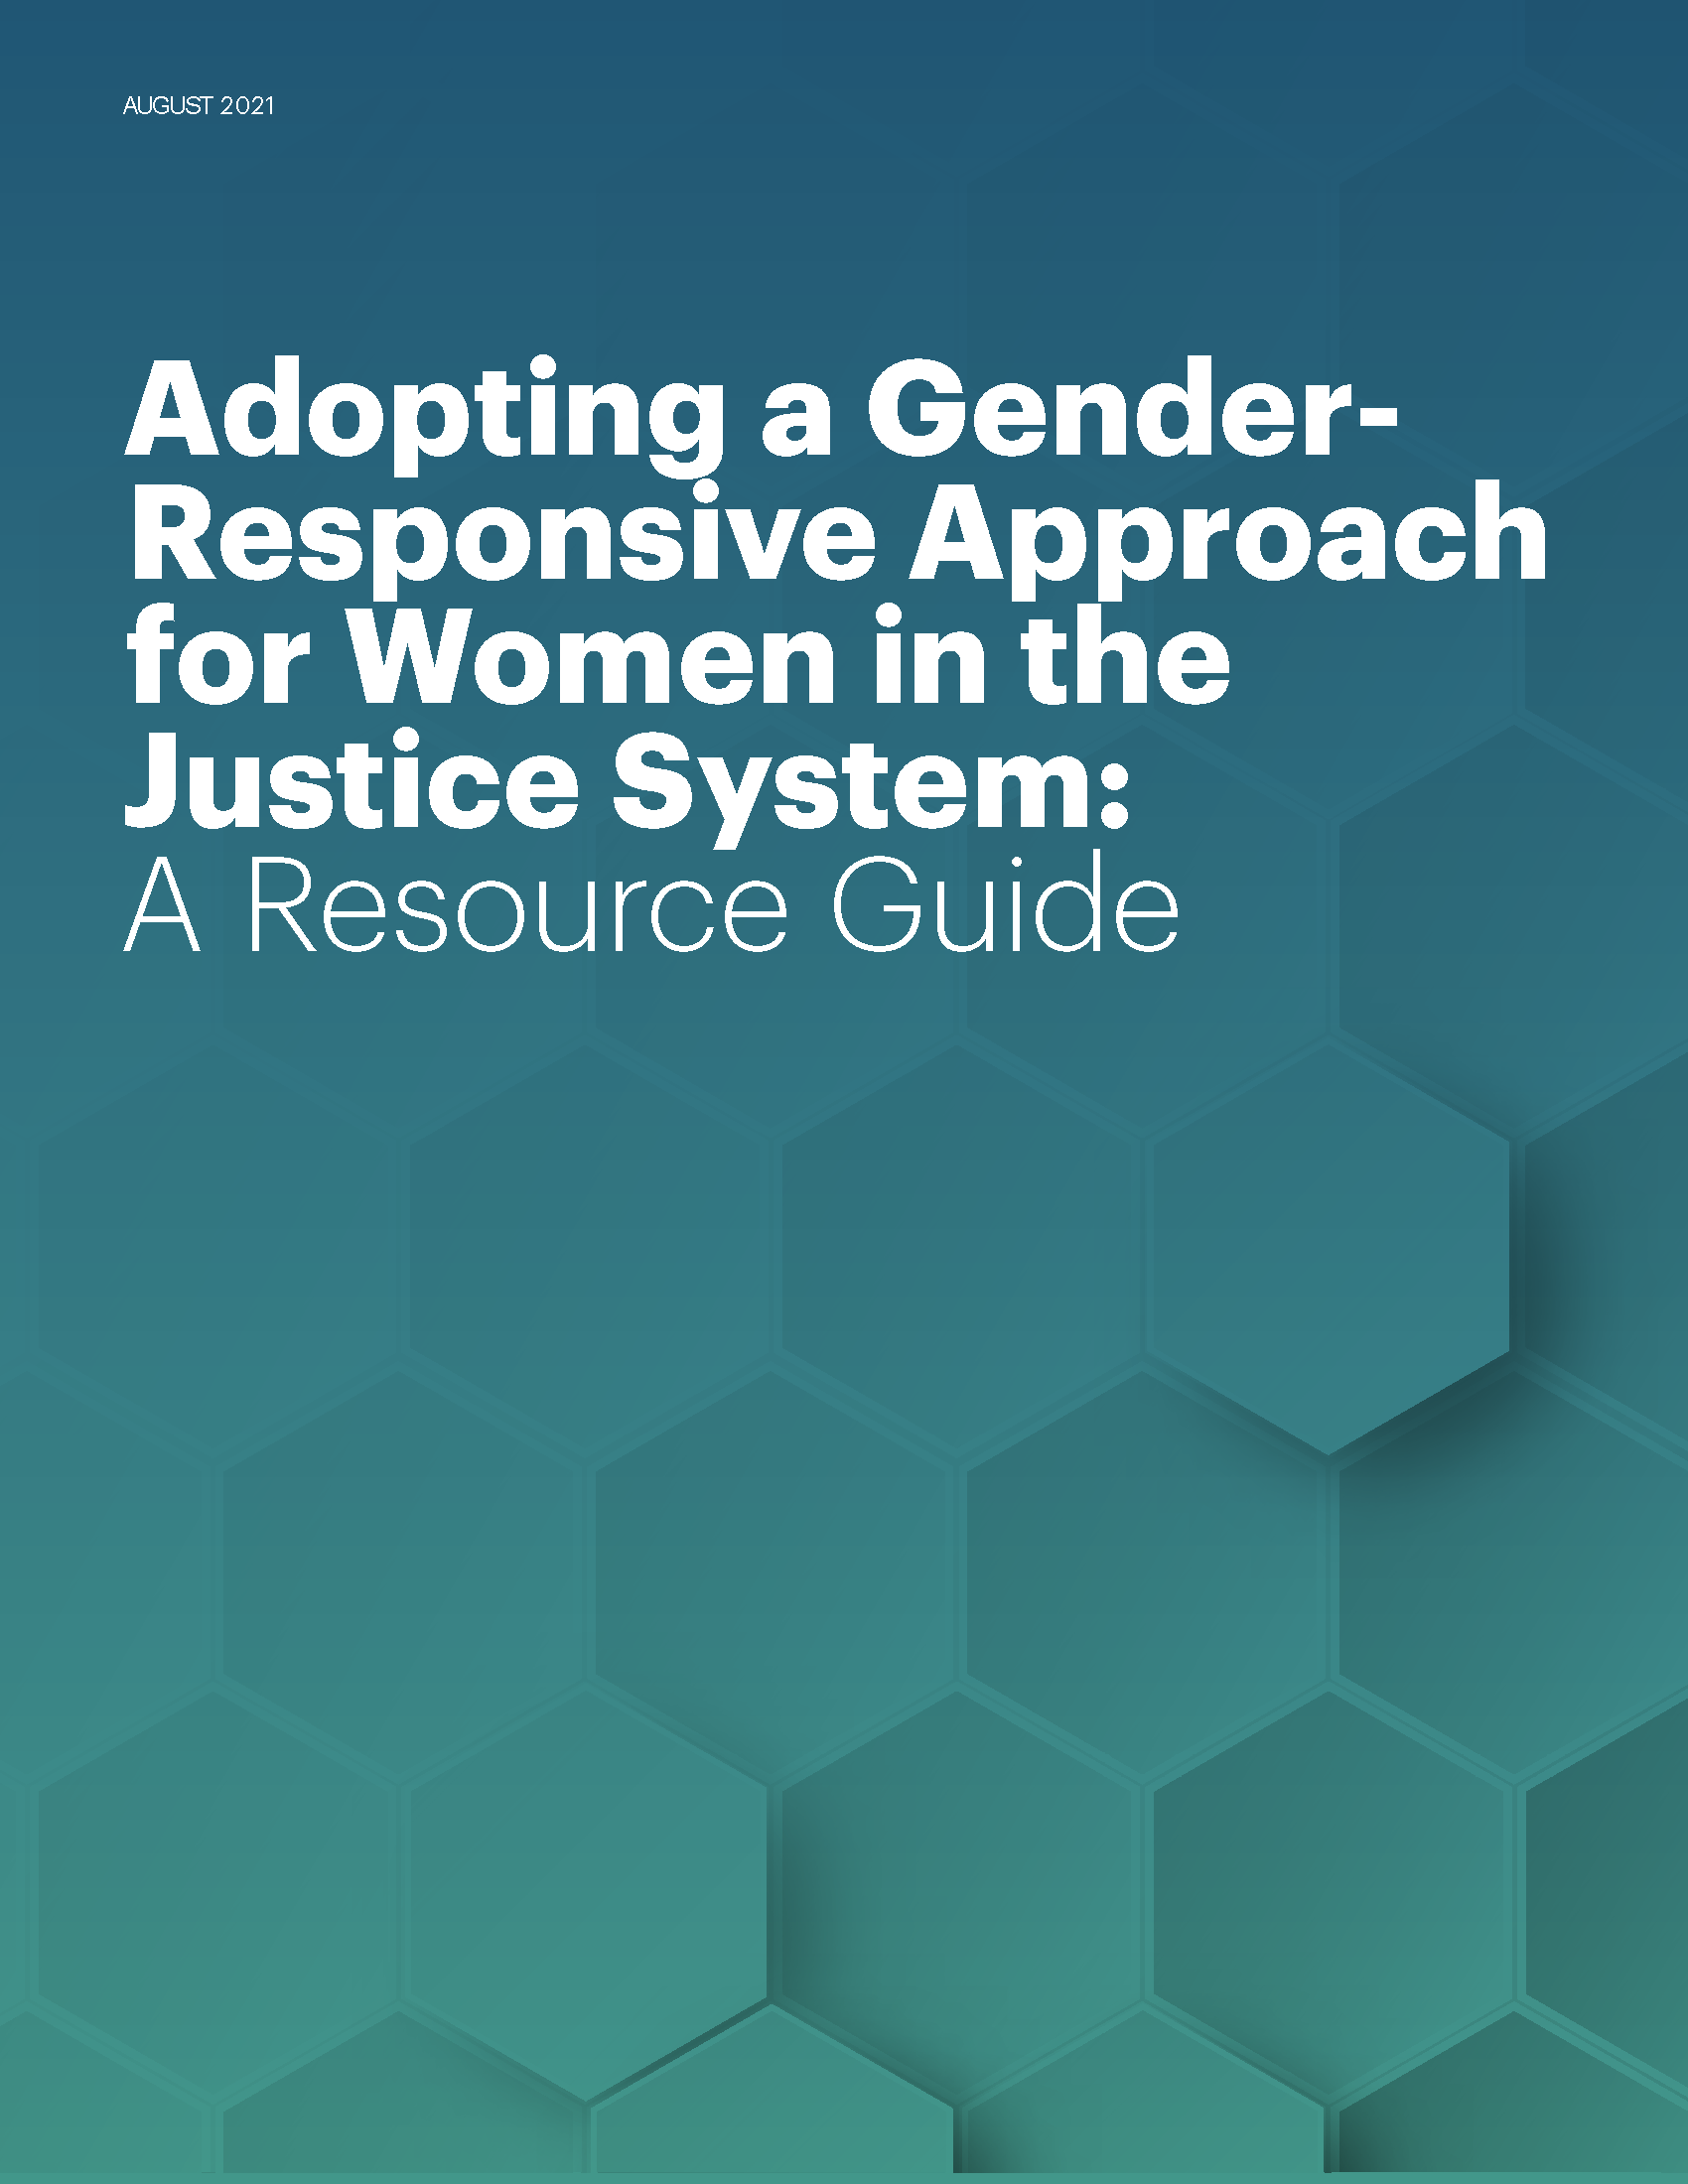 Adopting a Gender-Responsive Approach for Women in the Justice System A Resource Guide